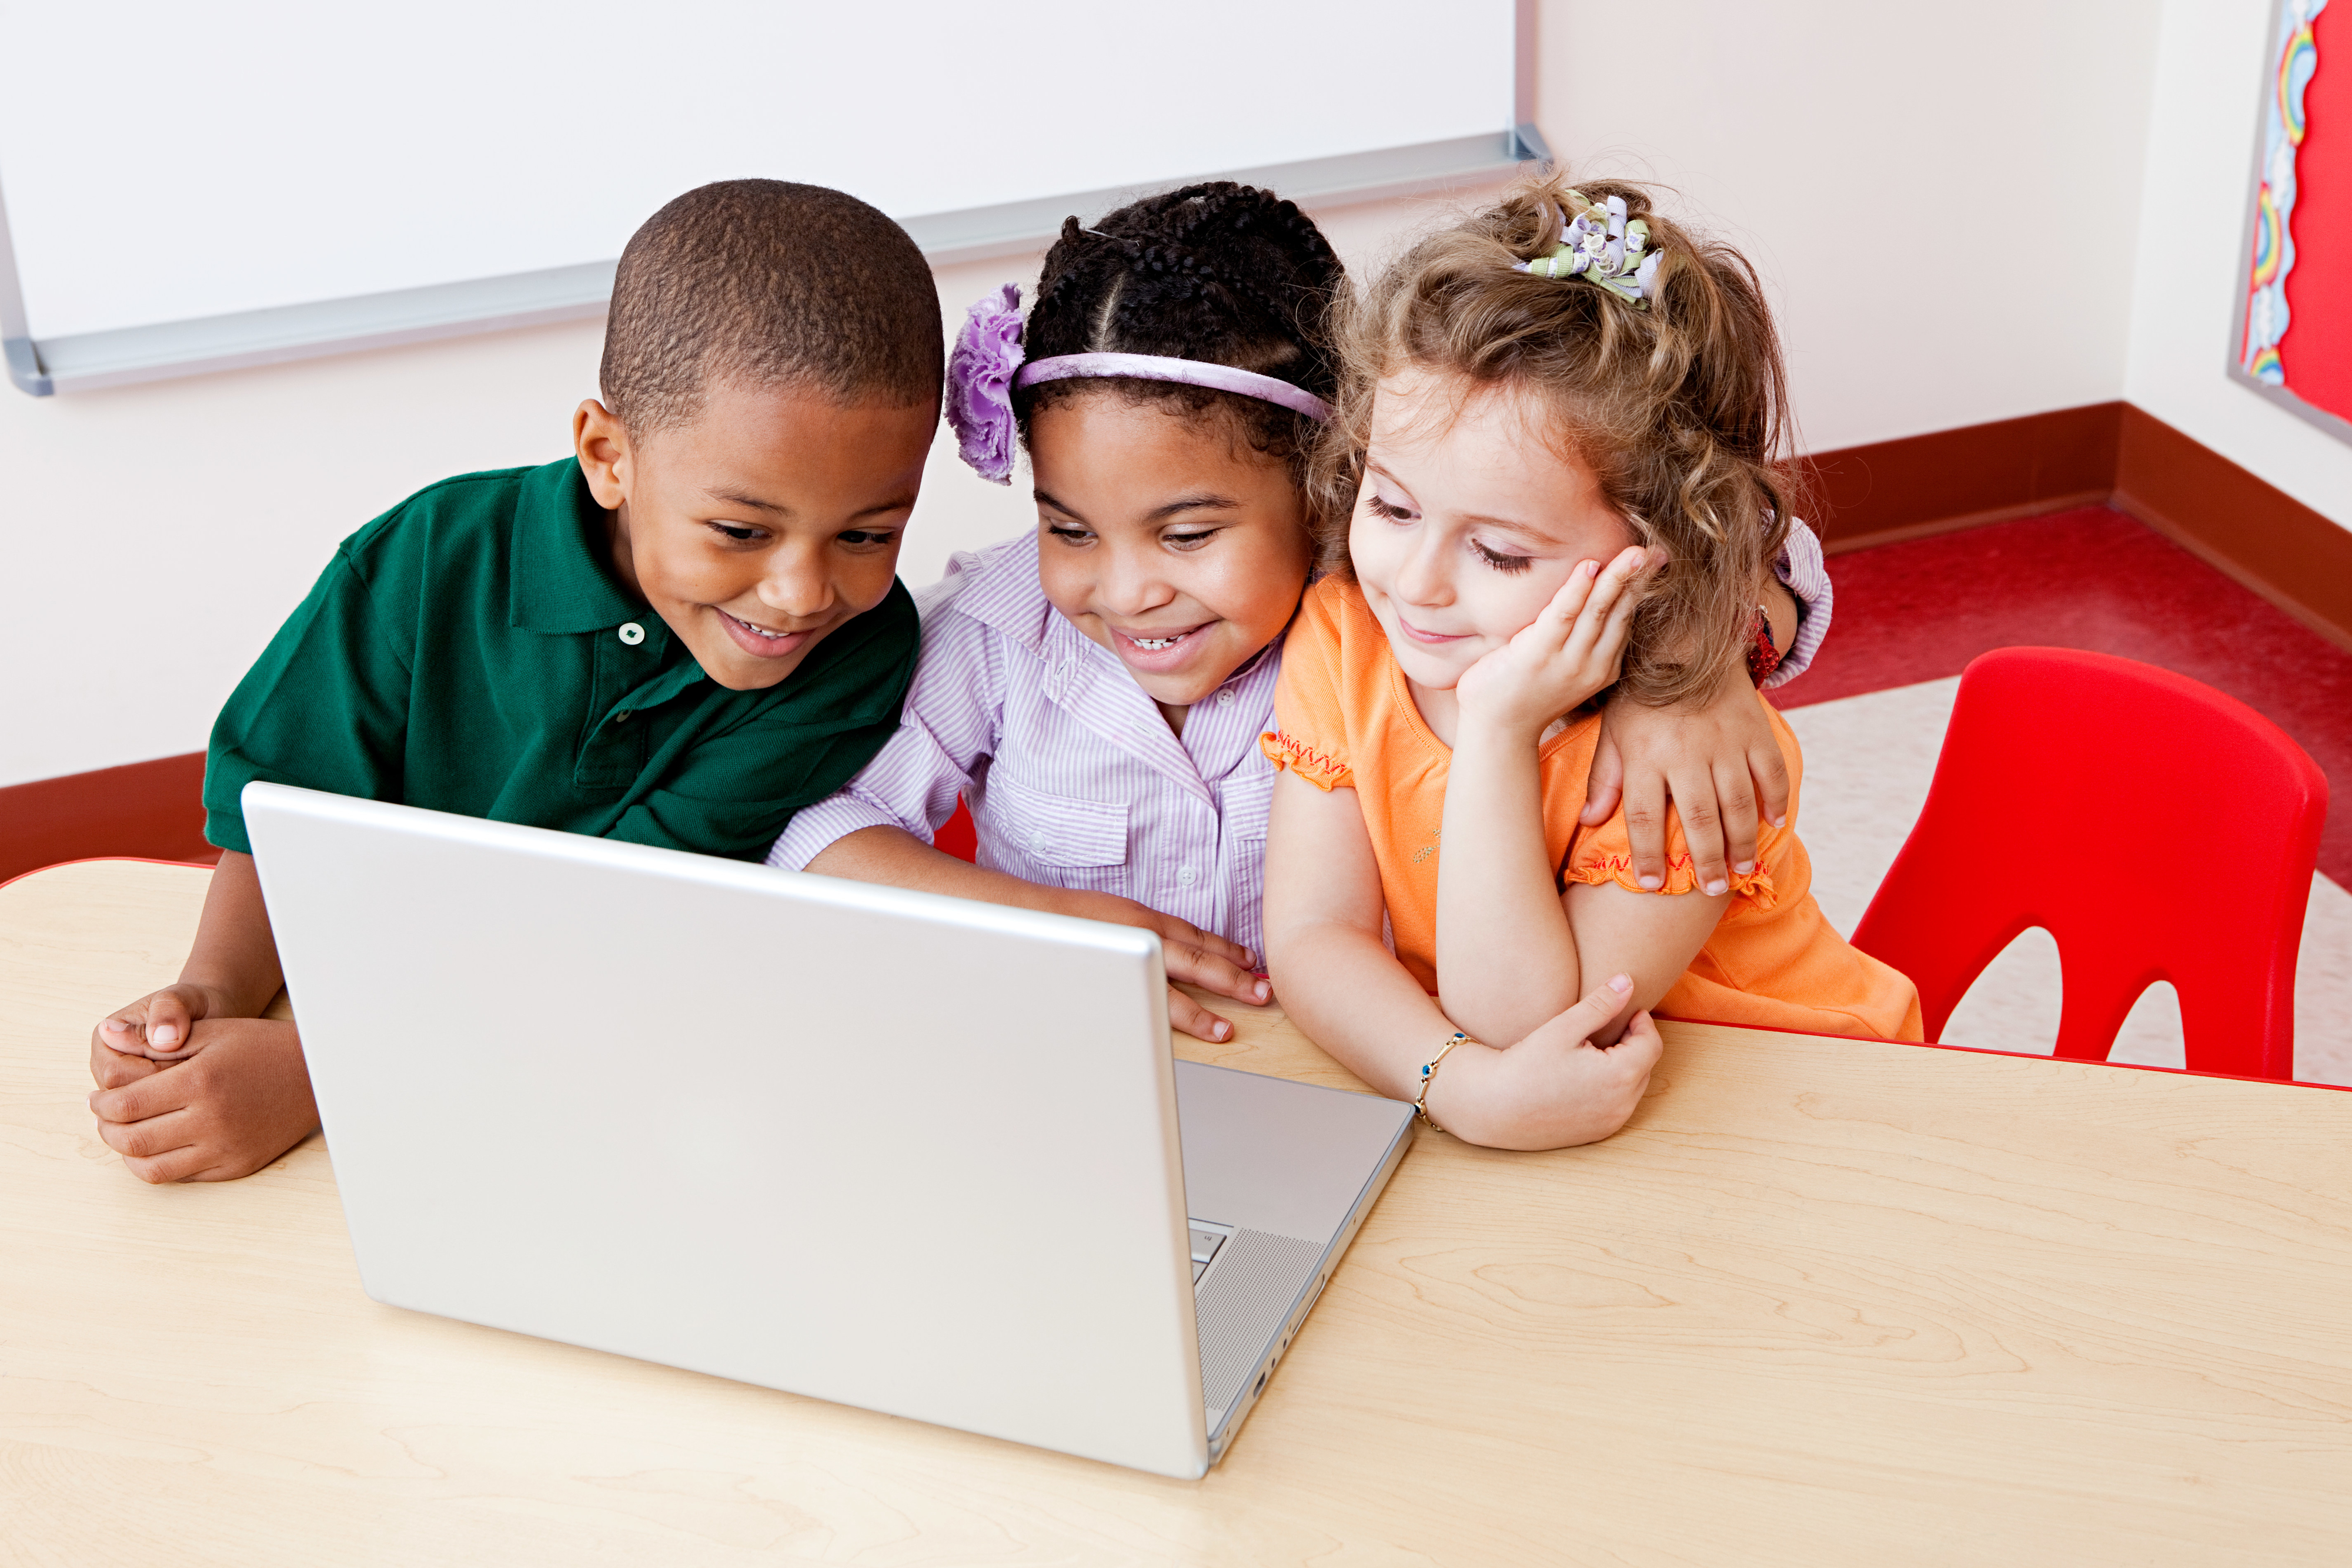 Three children are gathered around a laptop, appearing engaged and happy